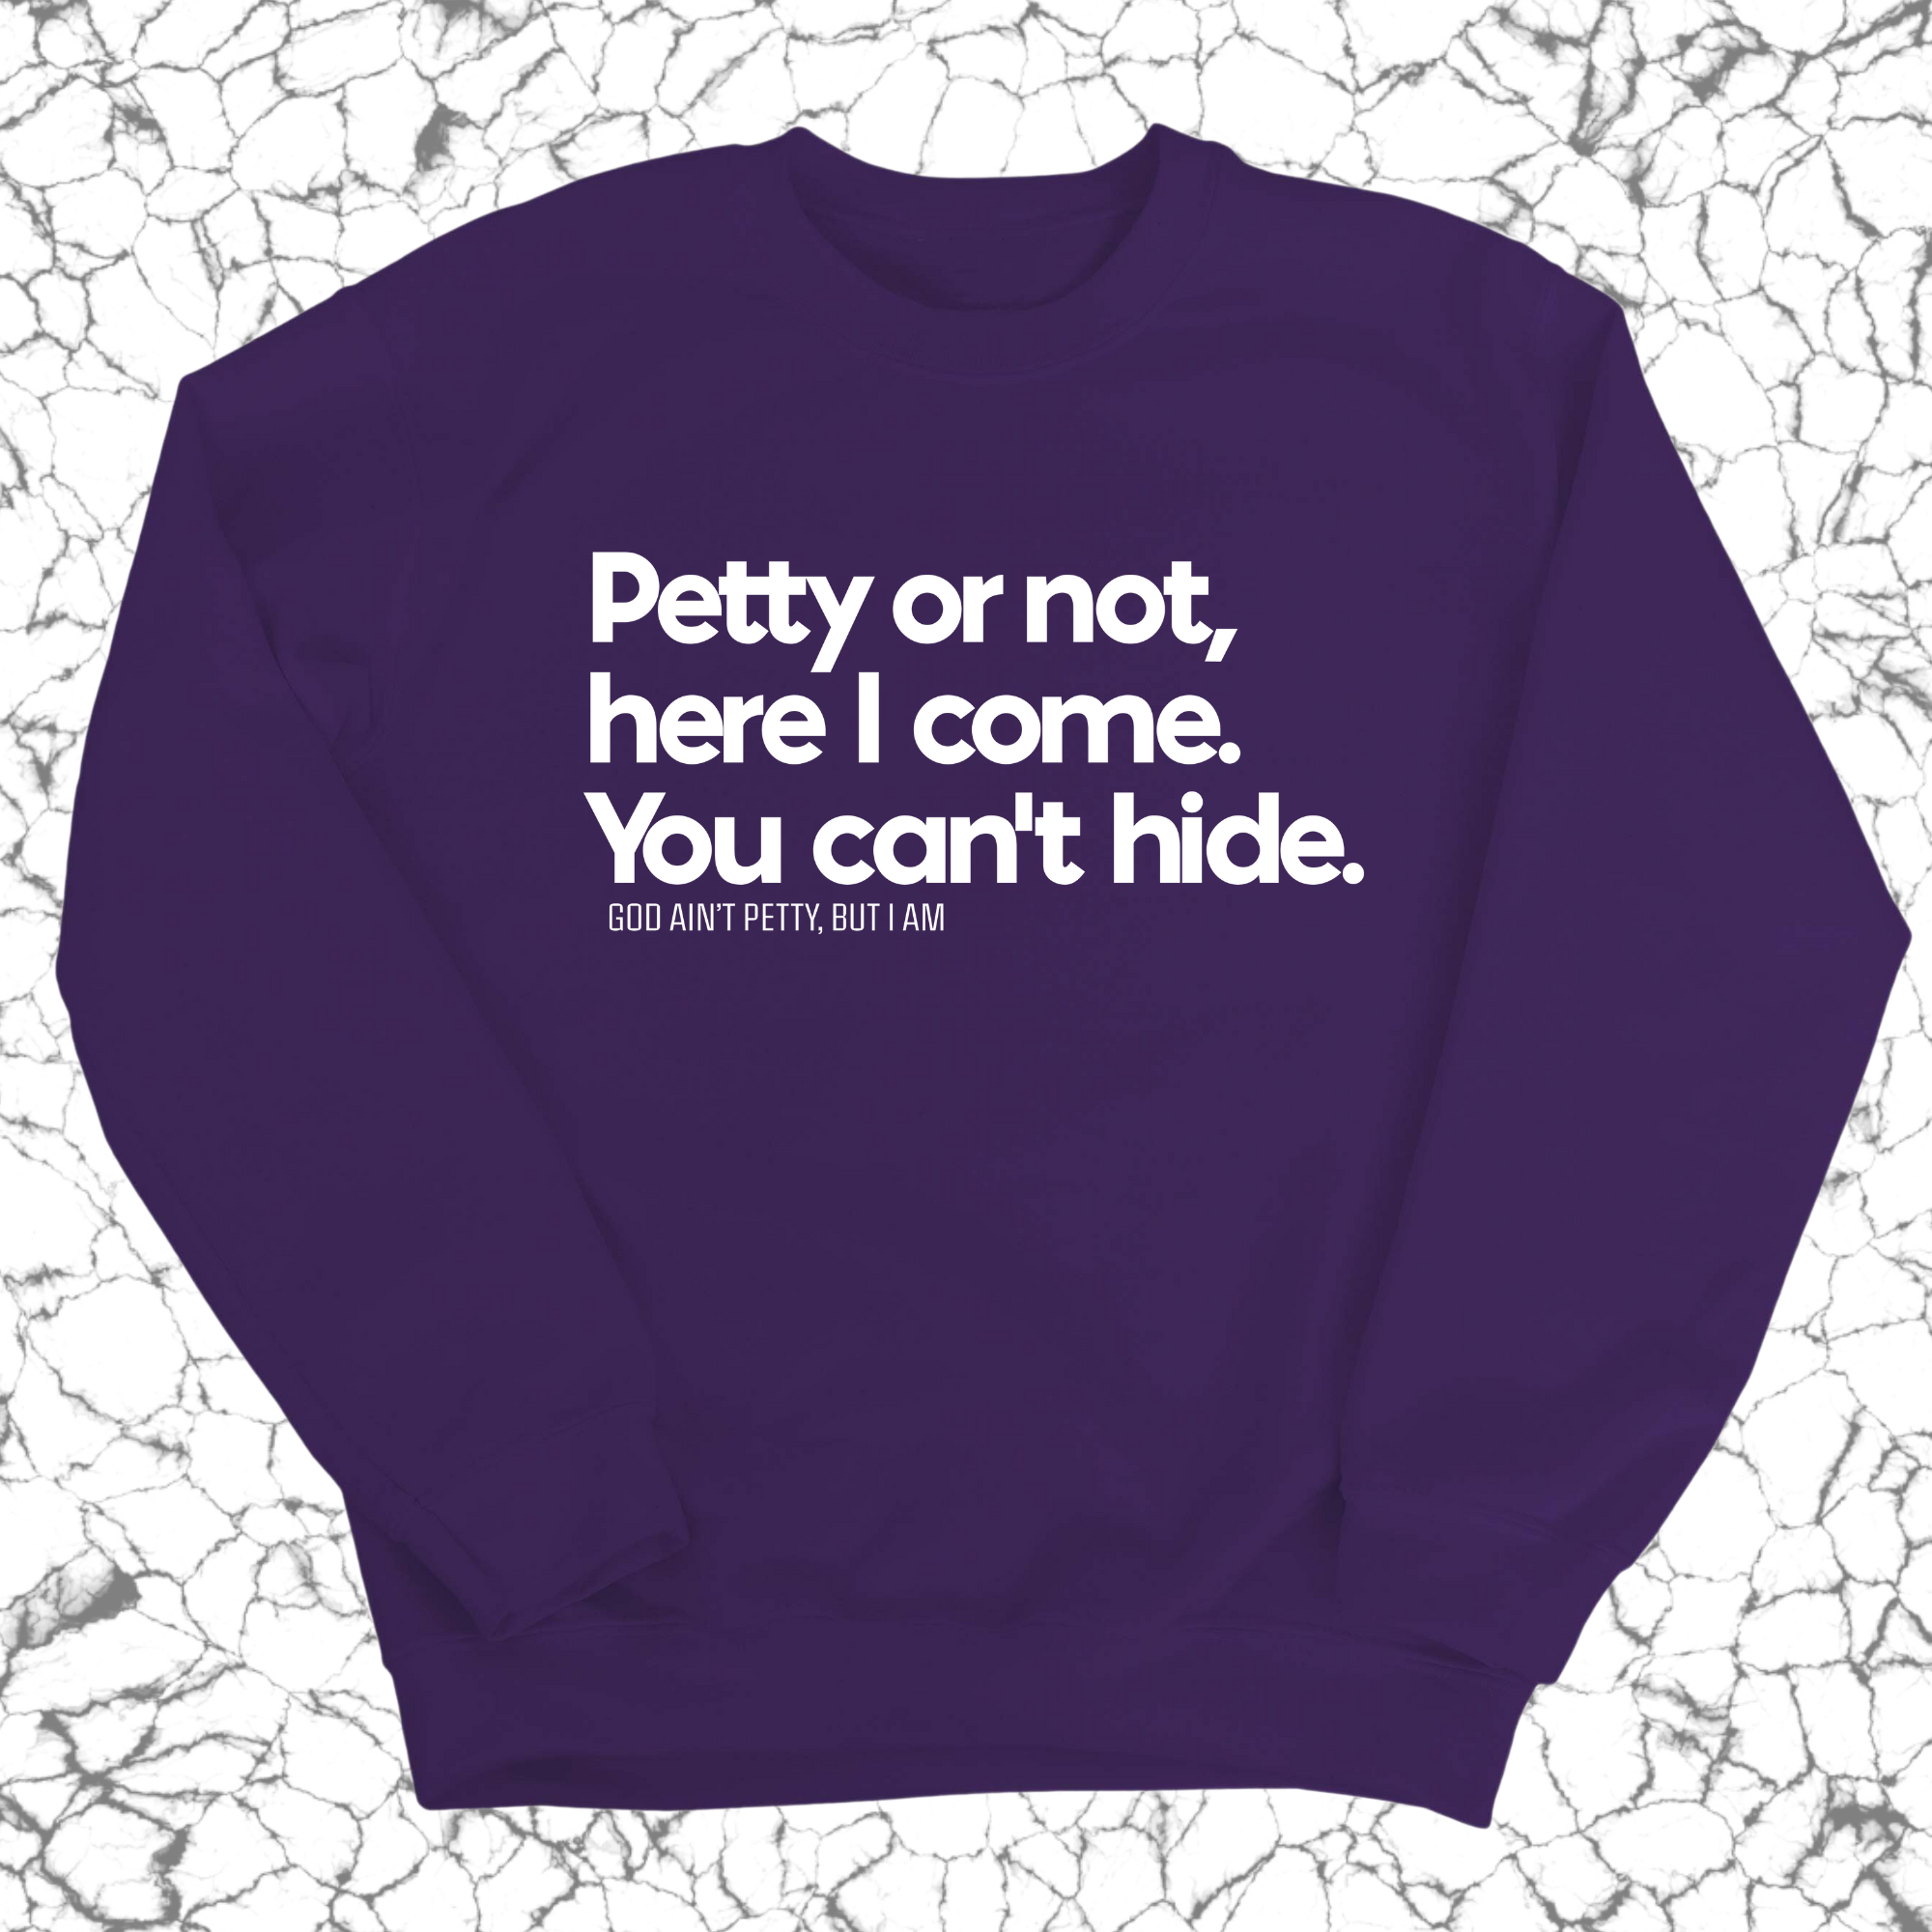 Petty or not here I come. You can't hide Unisex Sweatshirt-Sweatshirt-The Original God Ain't Petty But I Am